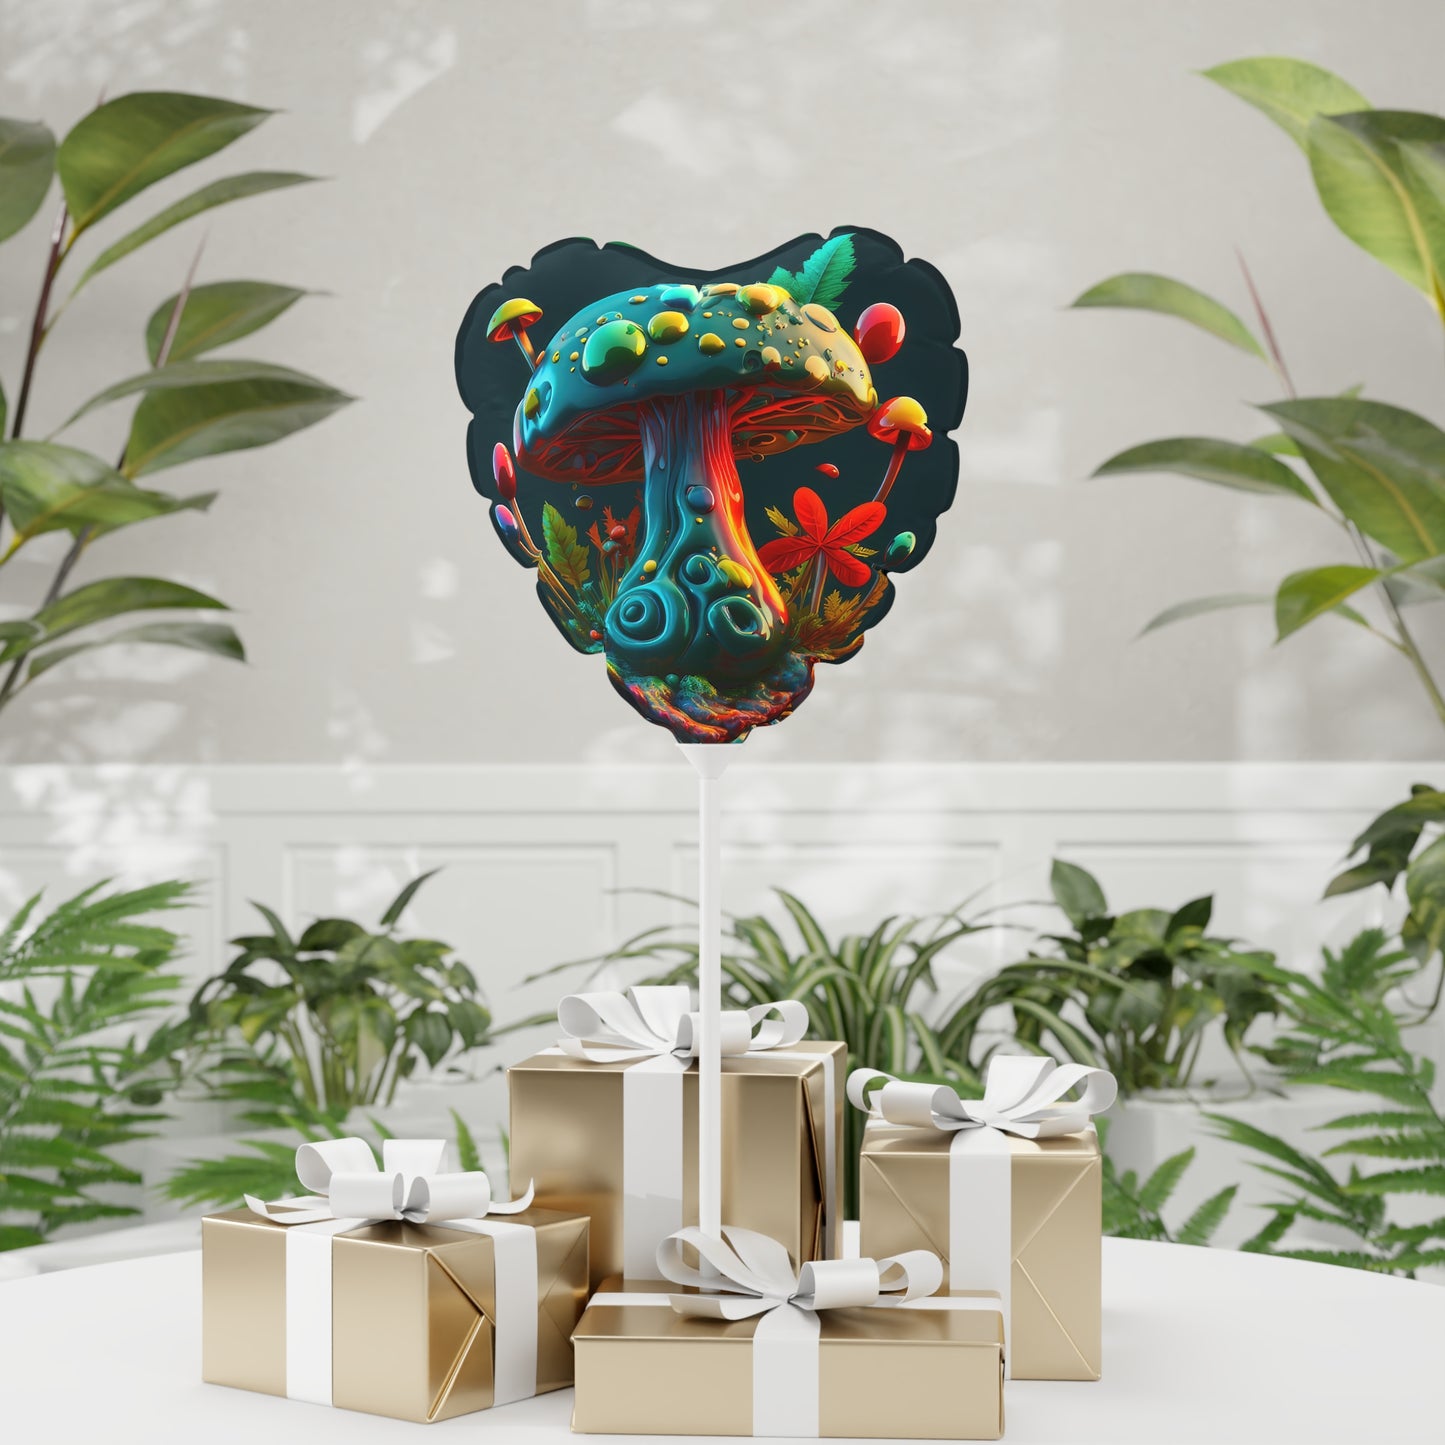 Hippie Mushroom Color Candy Style Design Style 5 Balloon (Round and Heart-shaped), 11"